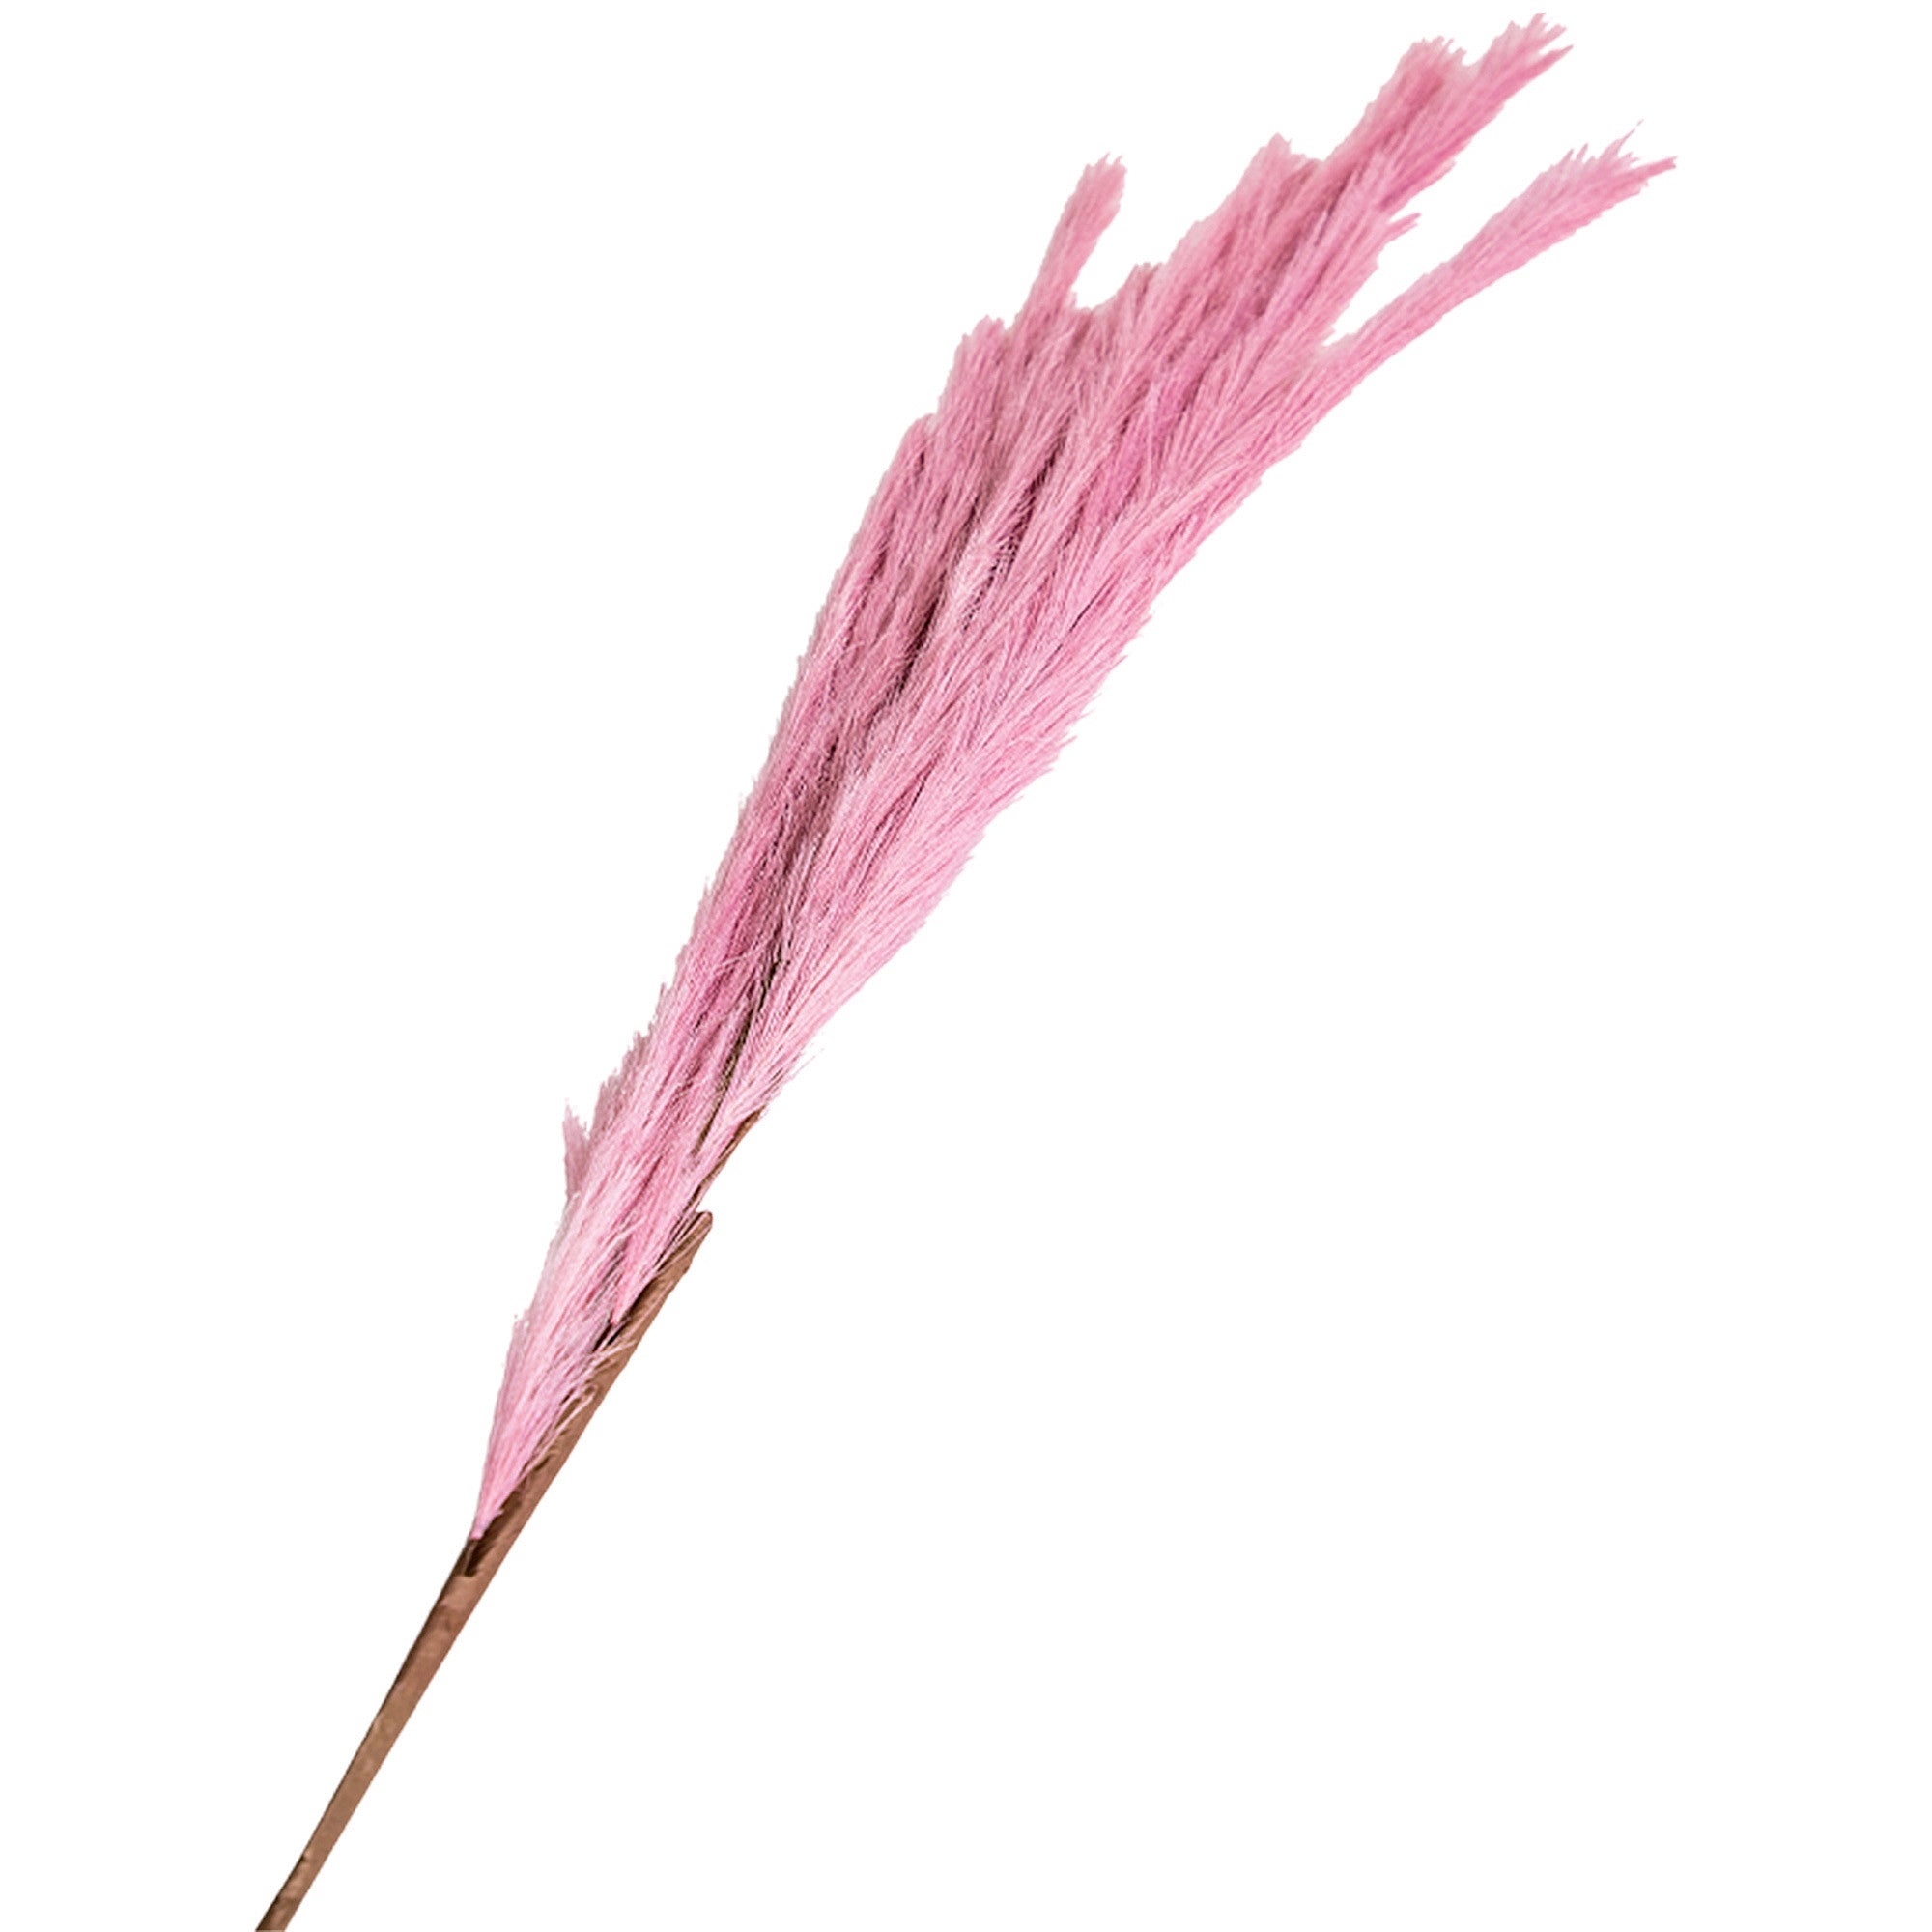 Faux Pink Silvergrass Stems | Set of 2